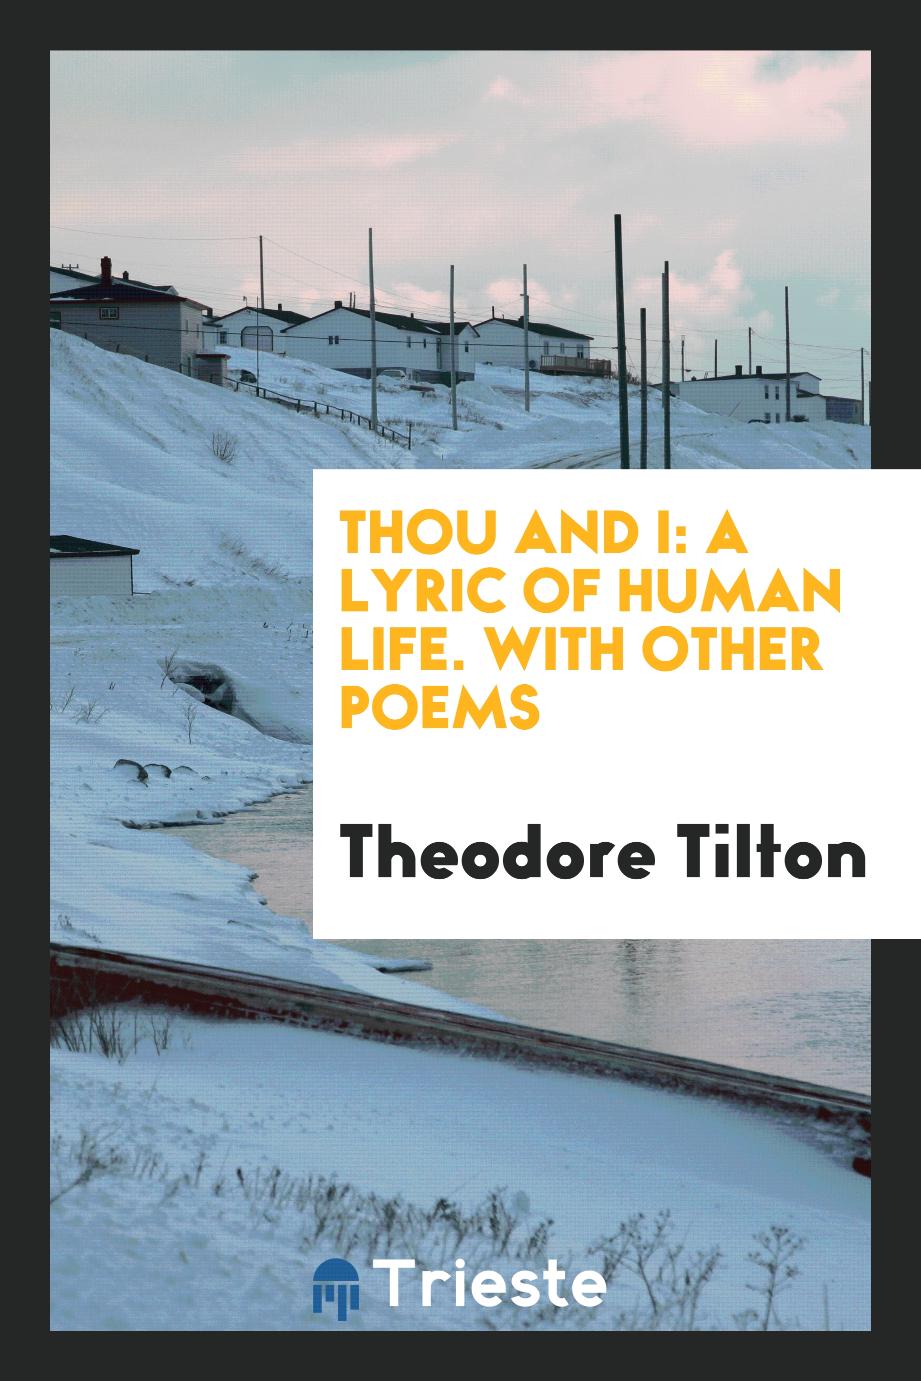 Thou and I: A Lyric of Human Life. With Other Poems